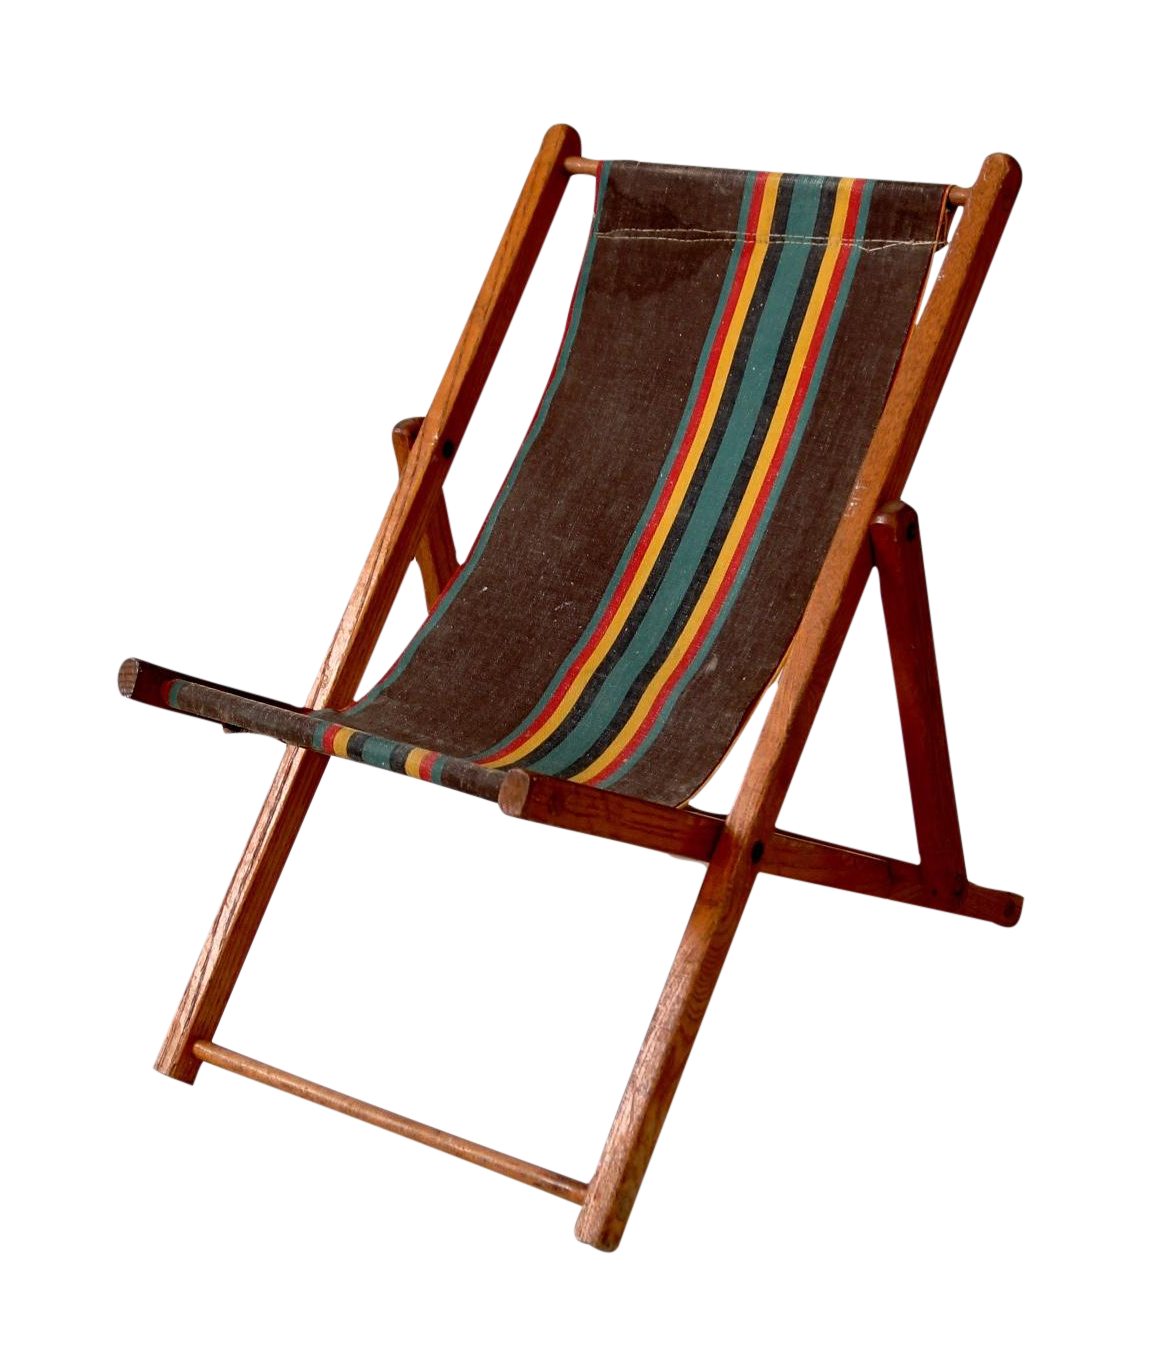 Download PNG image - Deck Chair Download PNG Image 